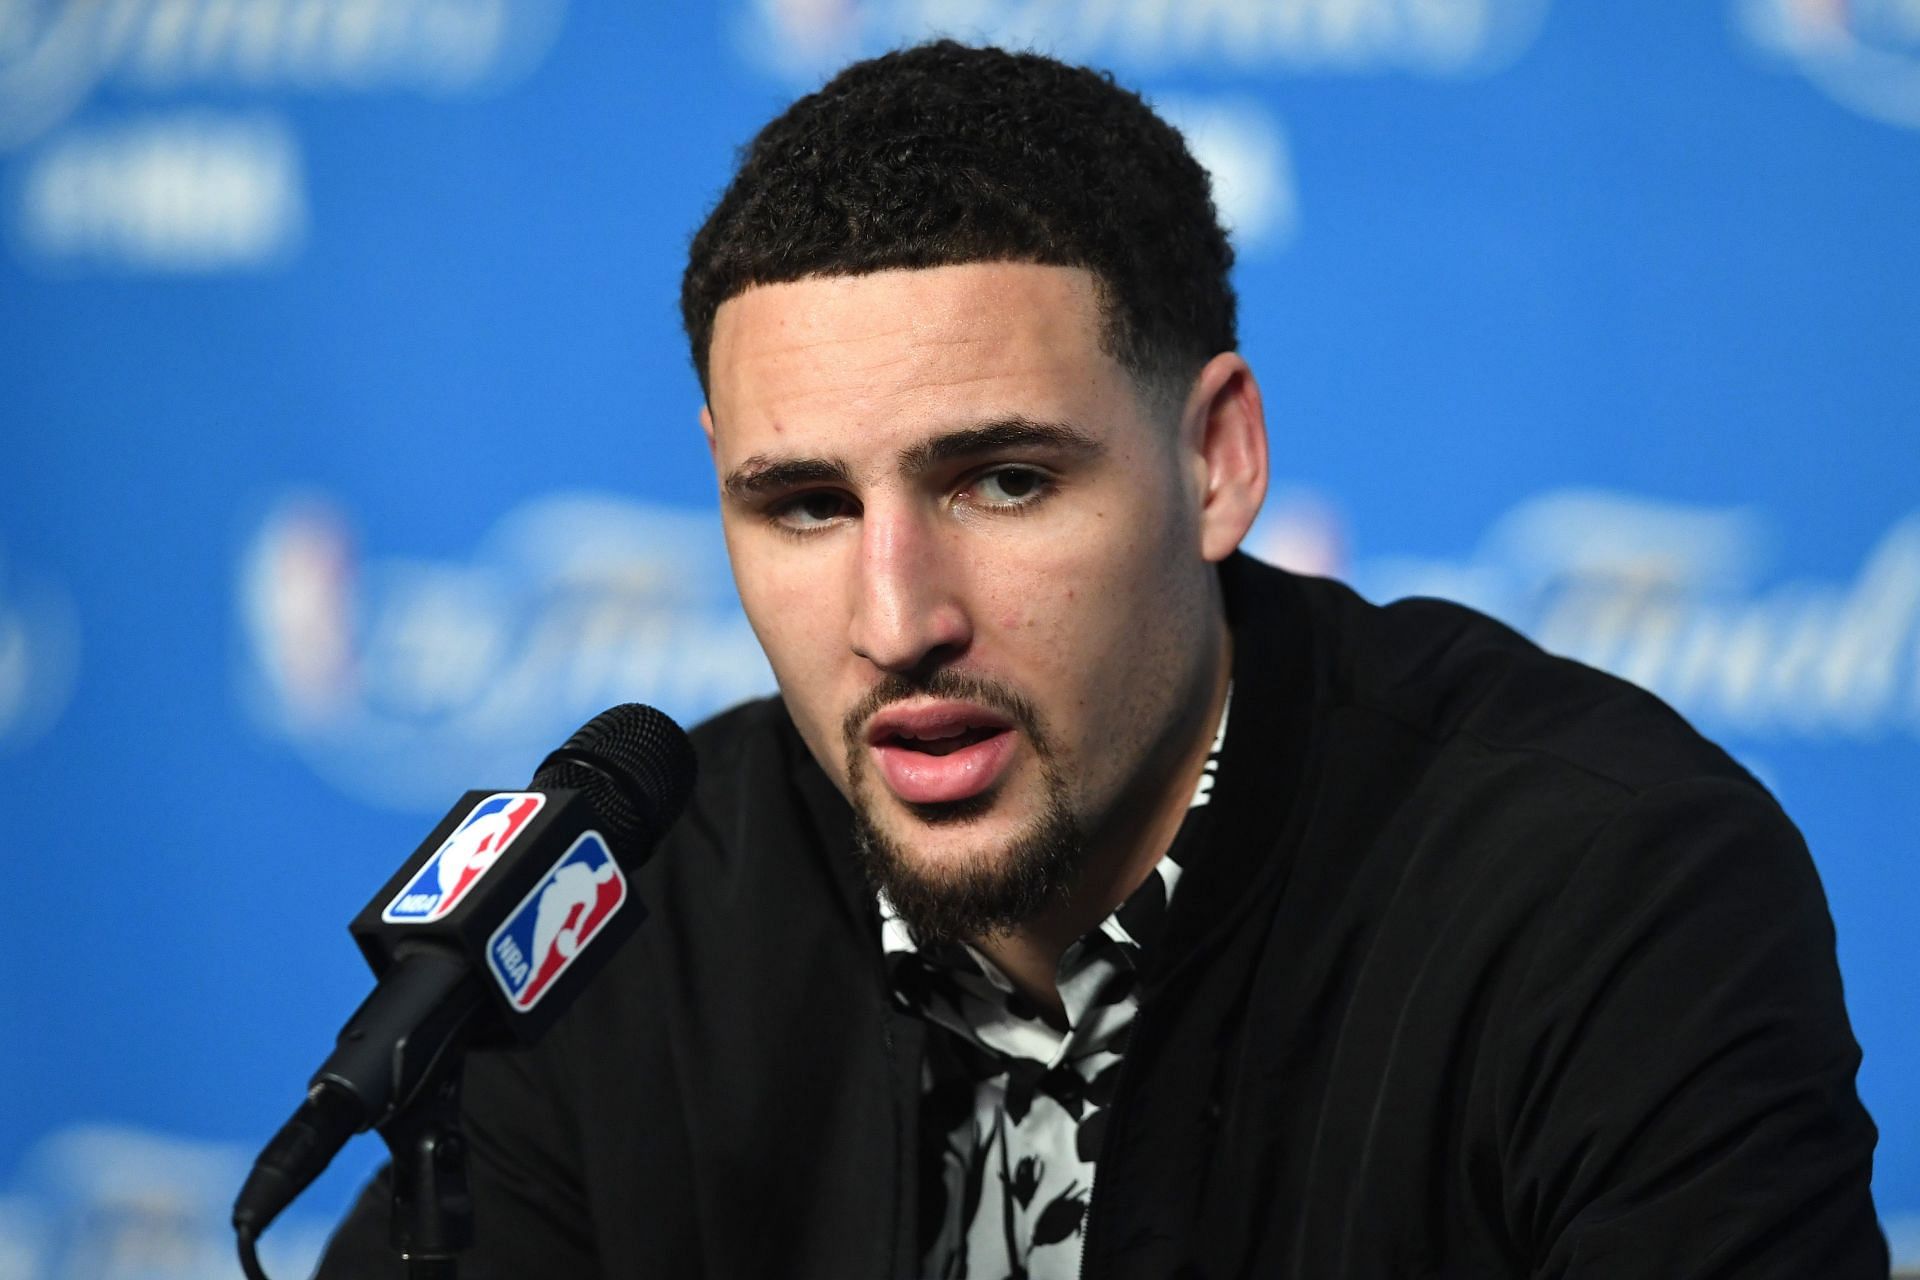 Klay Thompson #11 of the Golden State Warriors speaks to the media